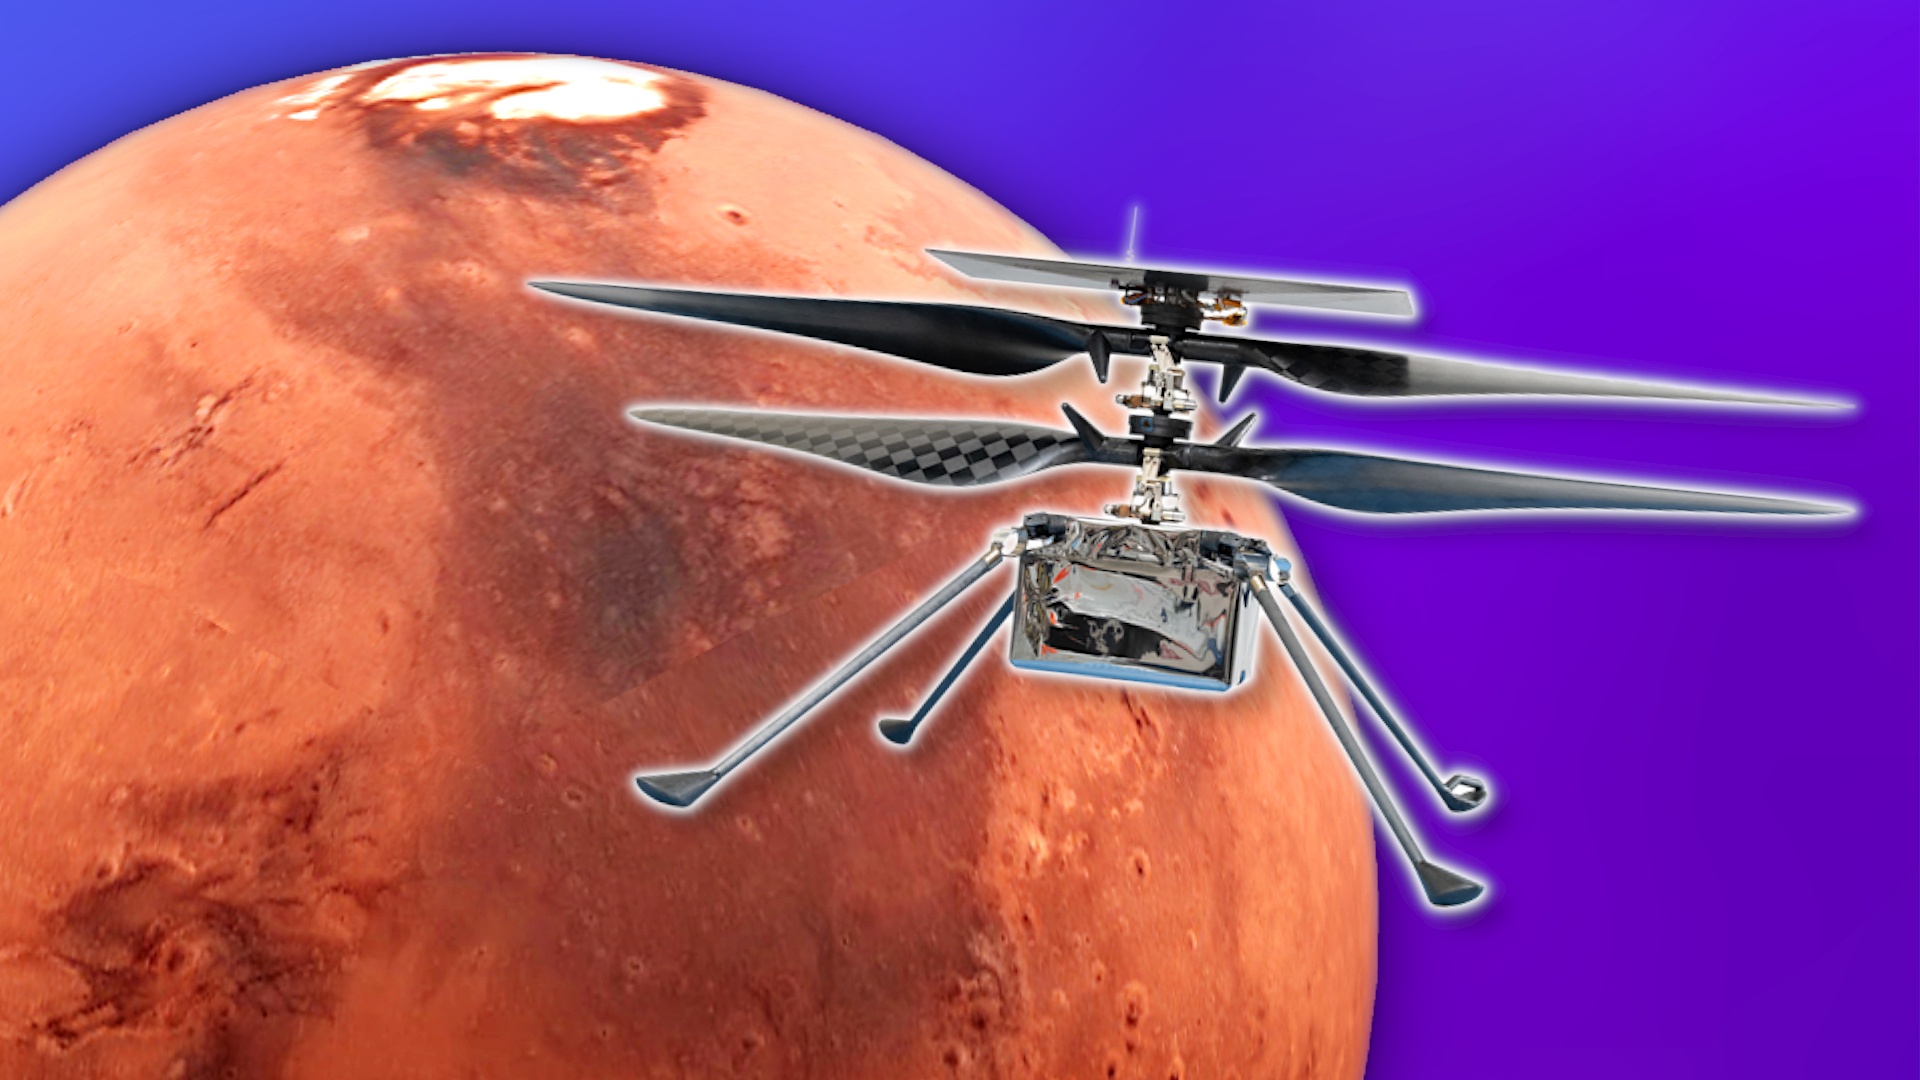 The Mars Rover has a flying companion that is very difficult to find